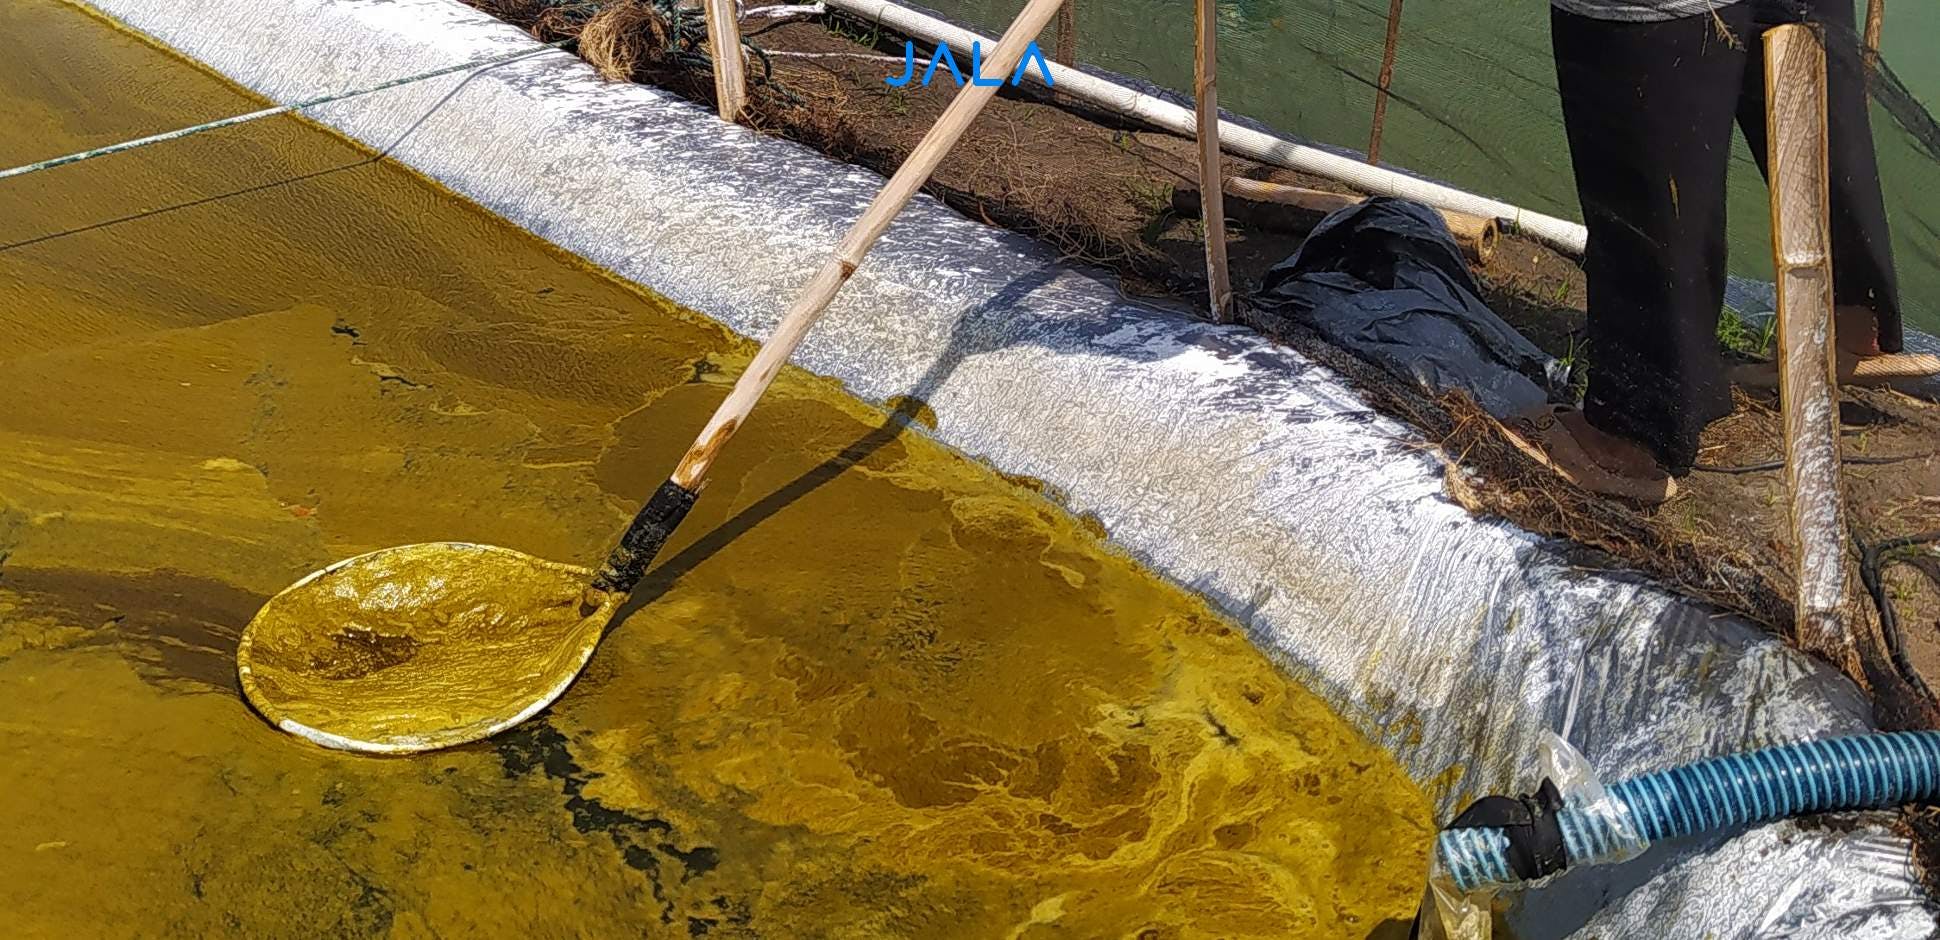 Causes and Mitigation Steps of Blooming Algae in Shrimp Farms: Farmers Should Be Aware